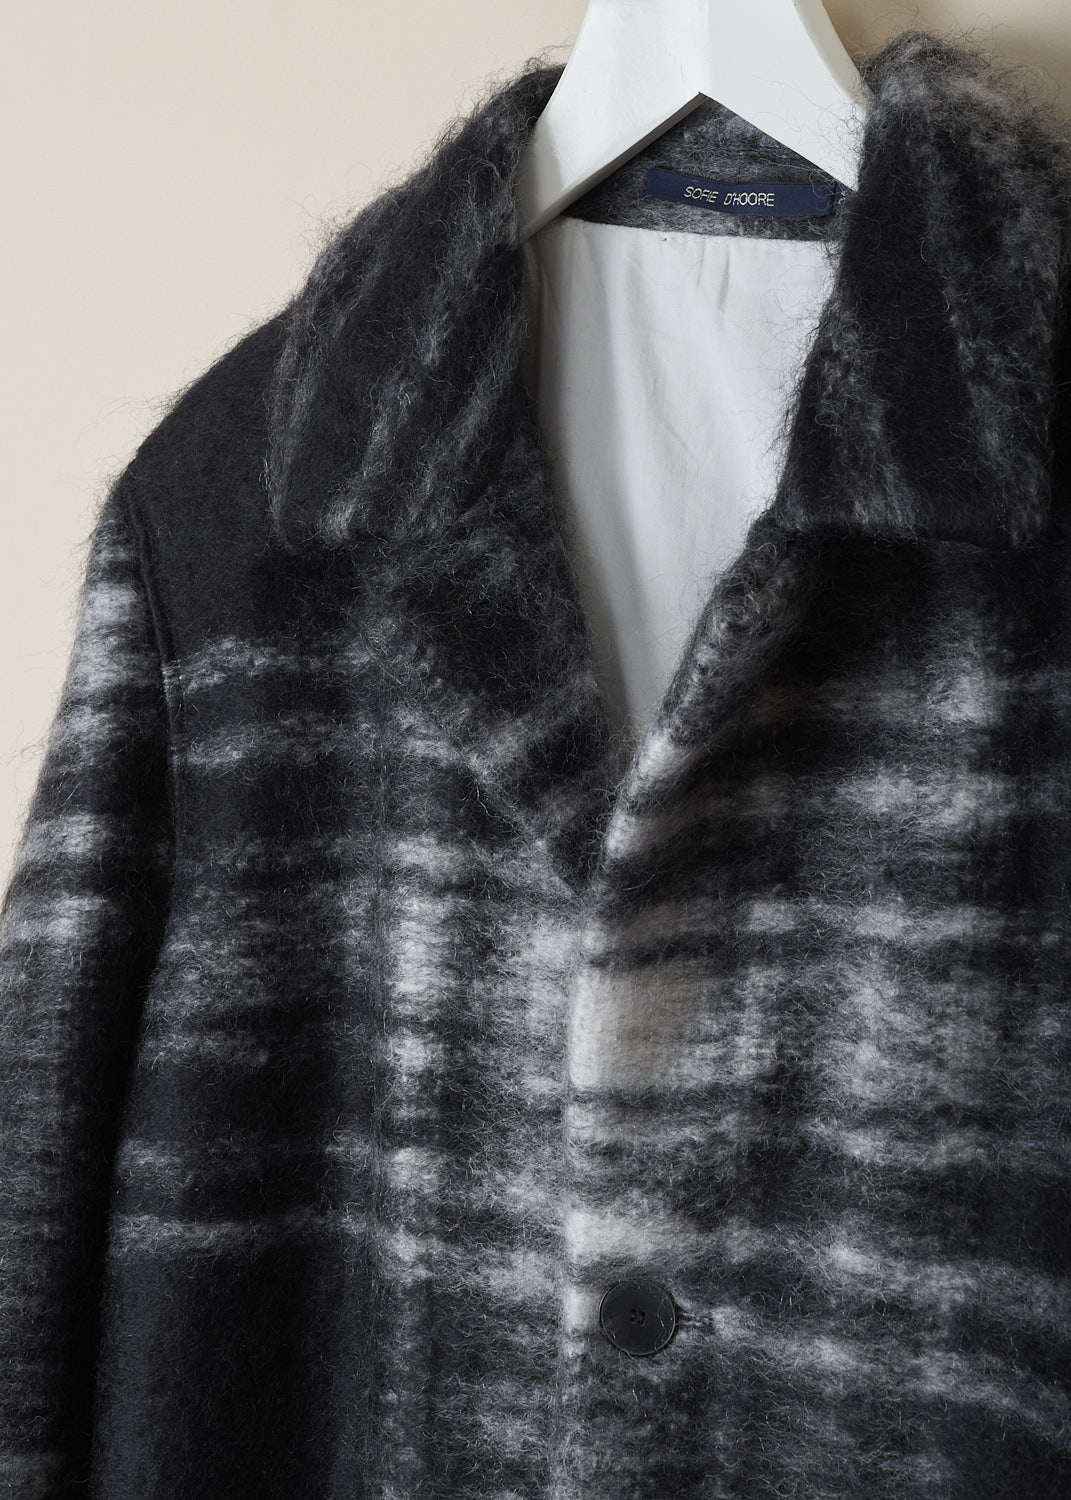 SOFIE Dâ€™HOORE, LONG BLACK AND WHITE TARTAN CAY COAT, CAY_WOMO_BLACK_TARTAN, Black, White, Print, Detail, This long black and white tartan Cay coat has a spread collar and a front button closure. The long sleeves have slightly dropped shoulders and a raw edged cuff. In the front, the coat has on-seam slanted pockets. The coat has a straight raw edged hemline. The coat is fully lined and has a single inner pocket. 
